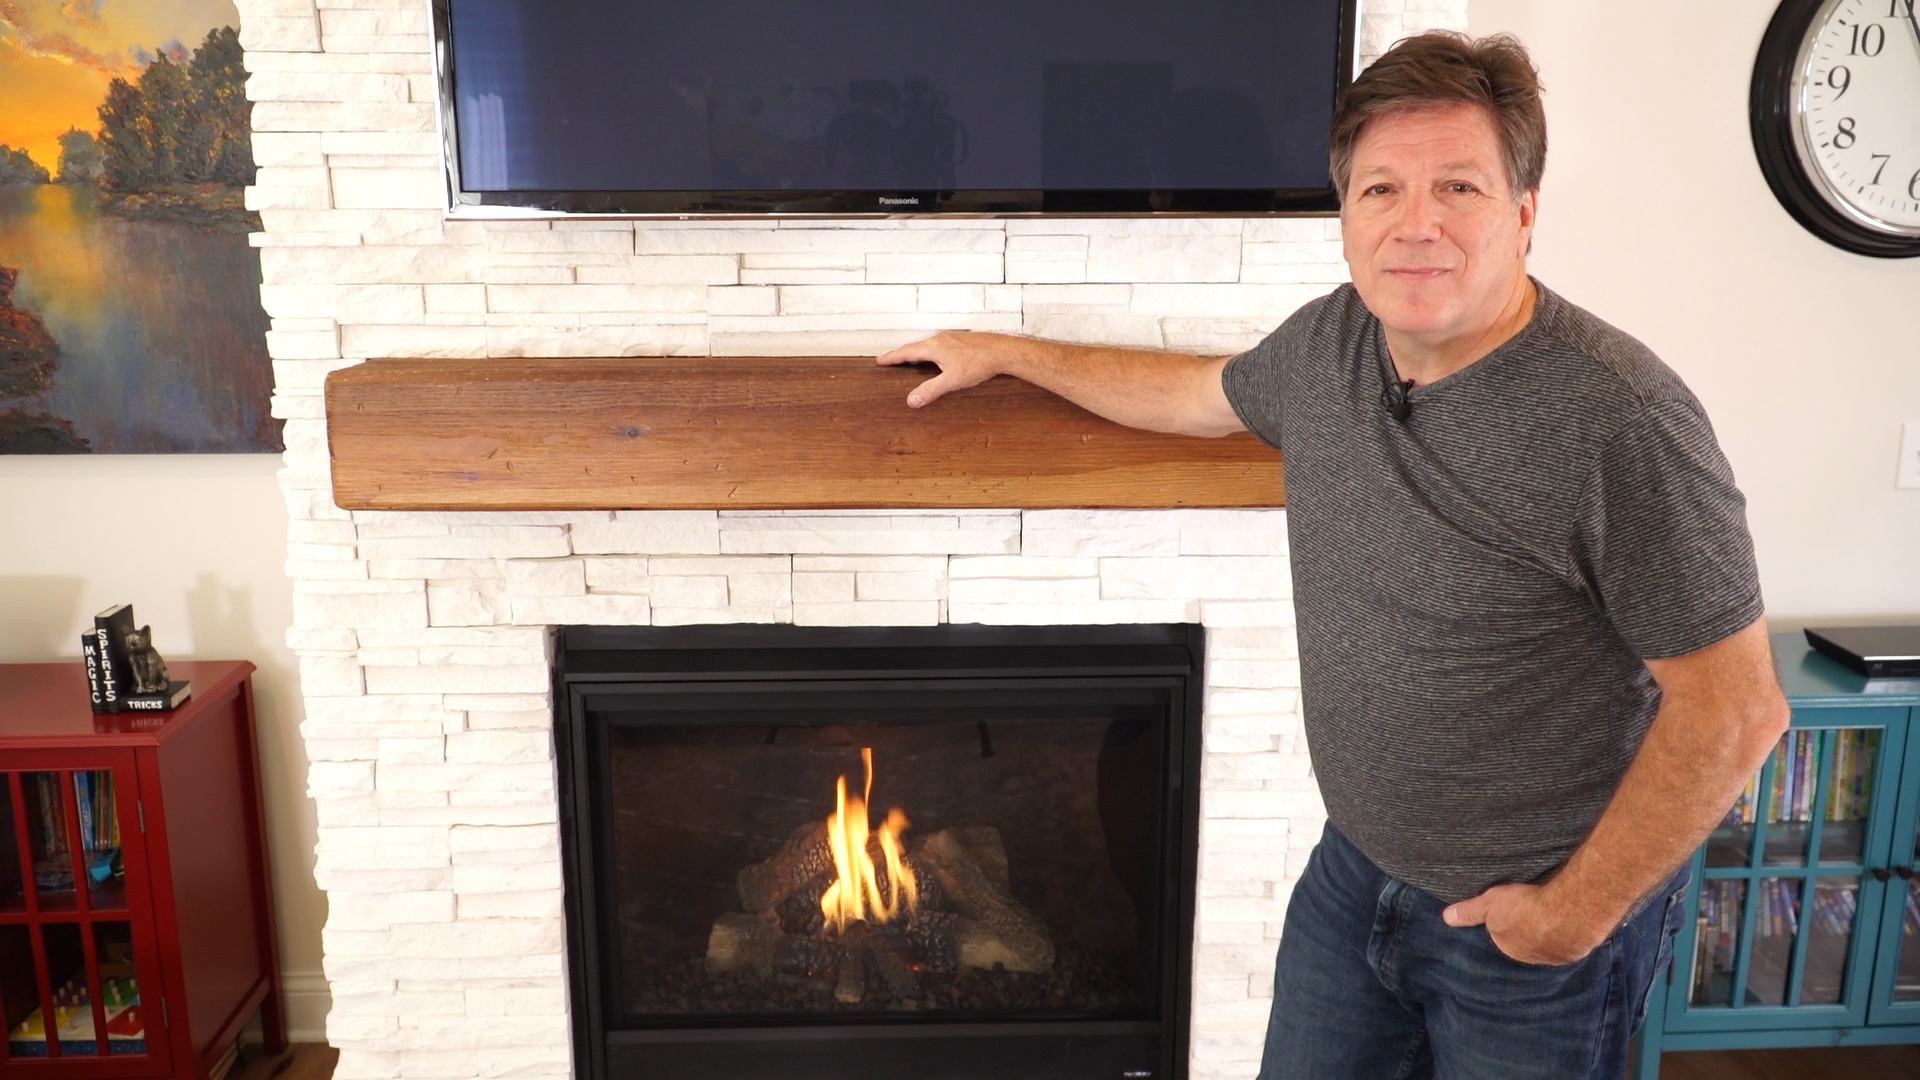 How To Install Vented Gas Logs How to Install a Gas Fireplace: DIY Built In Gas Fireplace